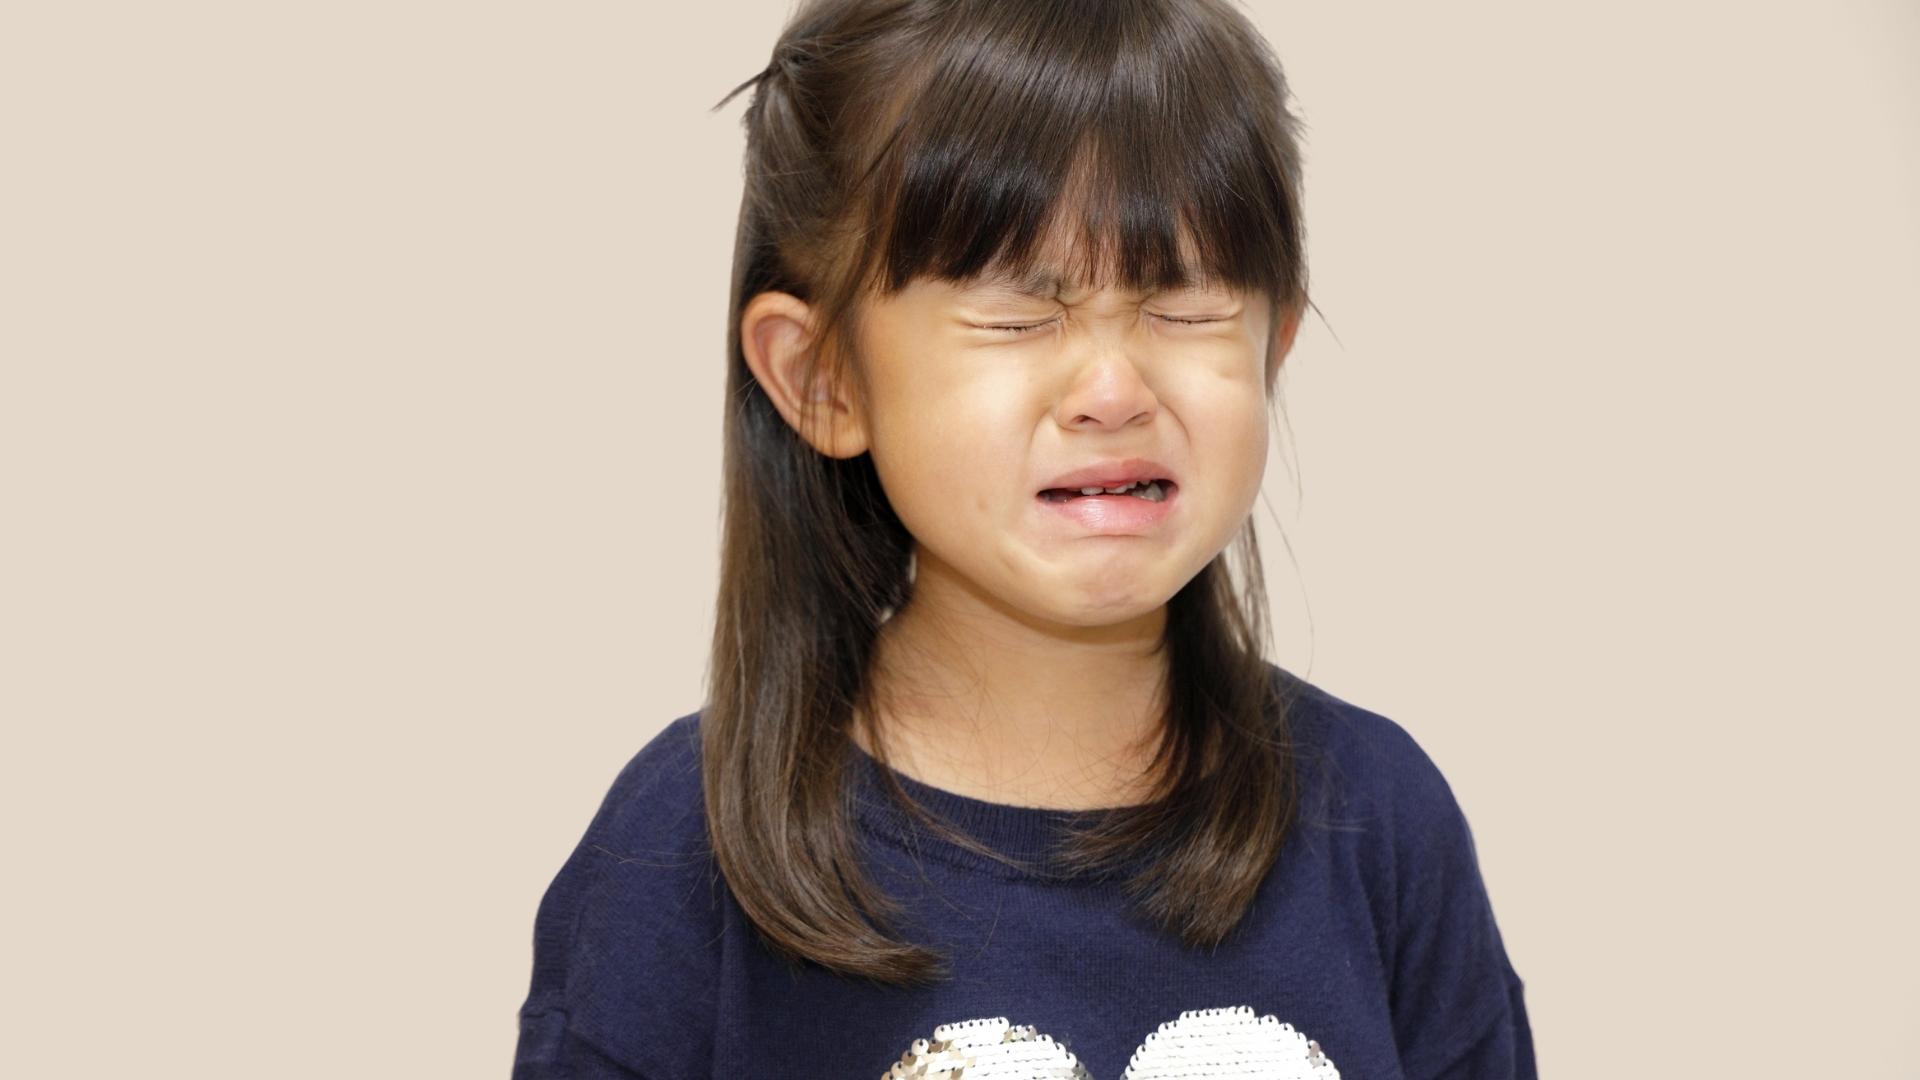 Tantrums In 5 Year Olds: The Best Advice You’ll Ever Receive